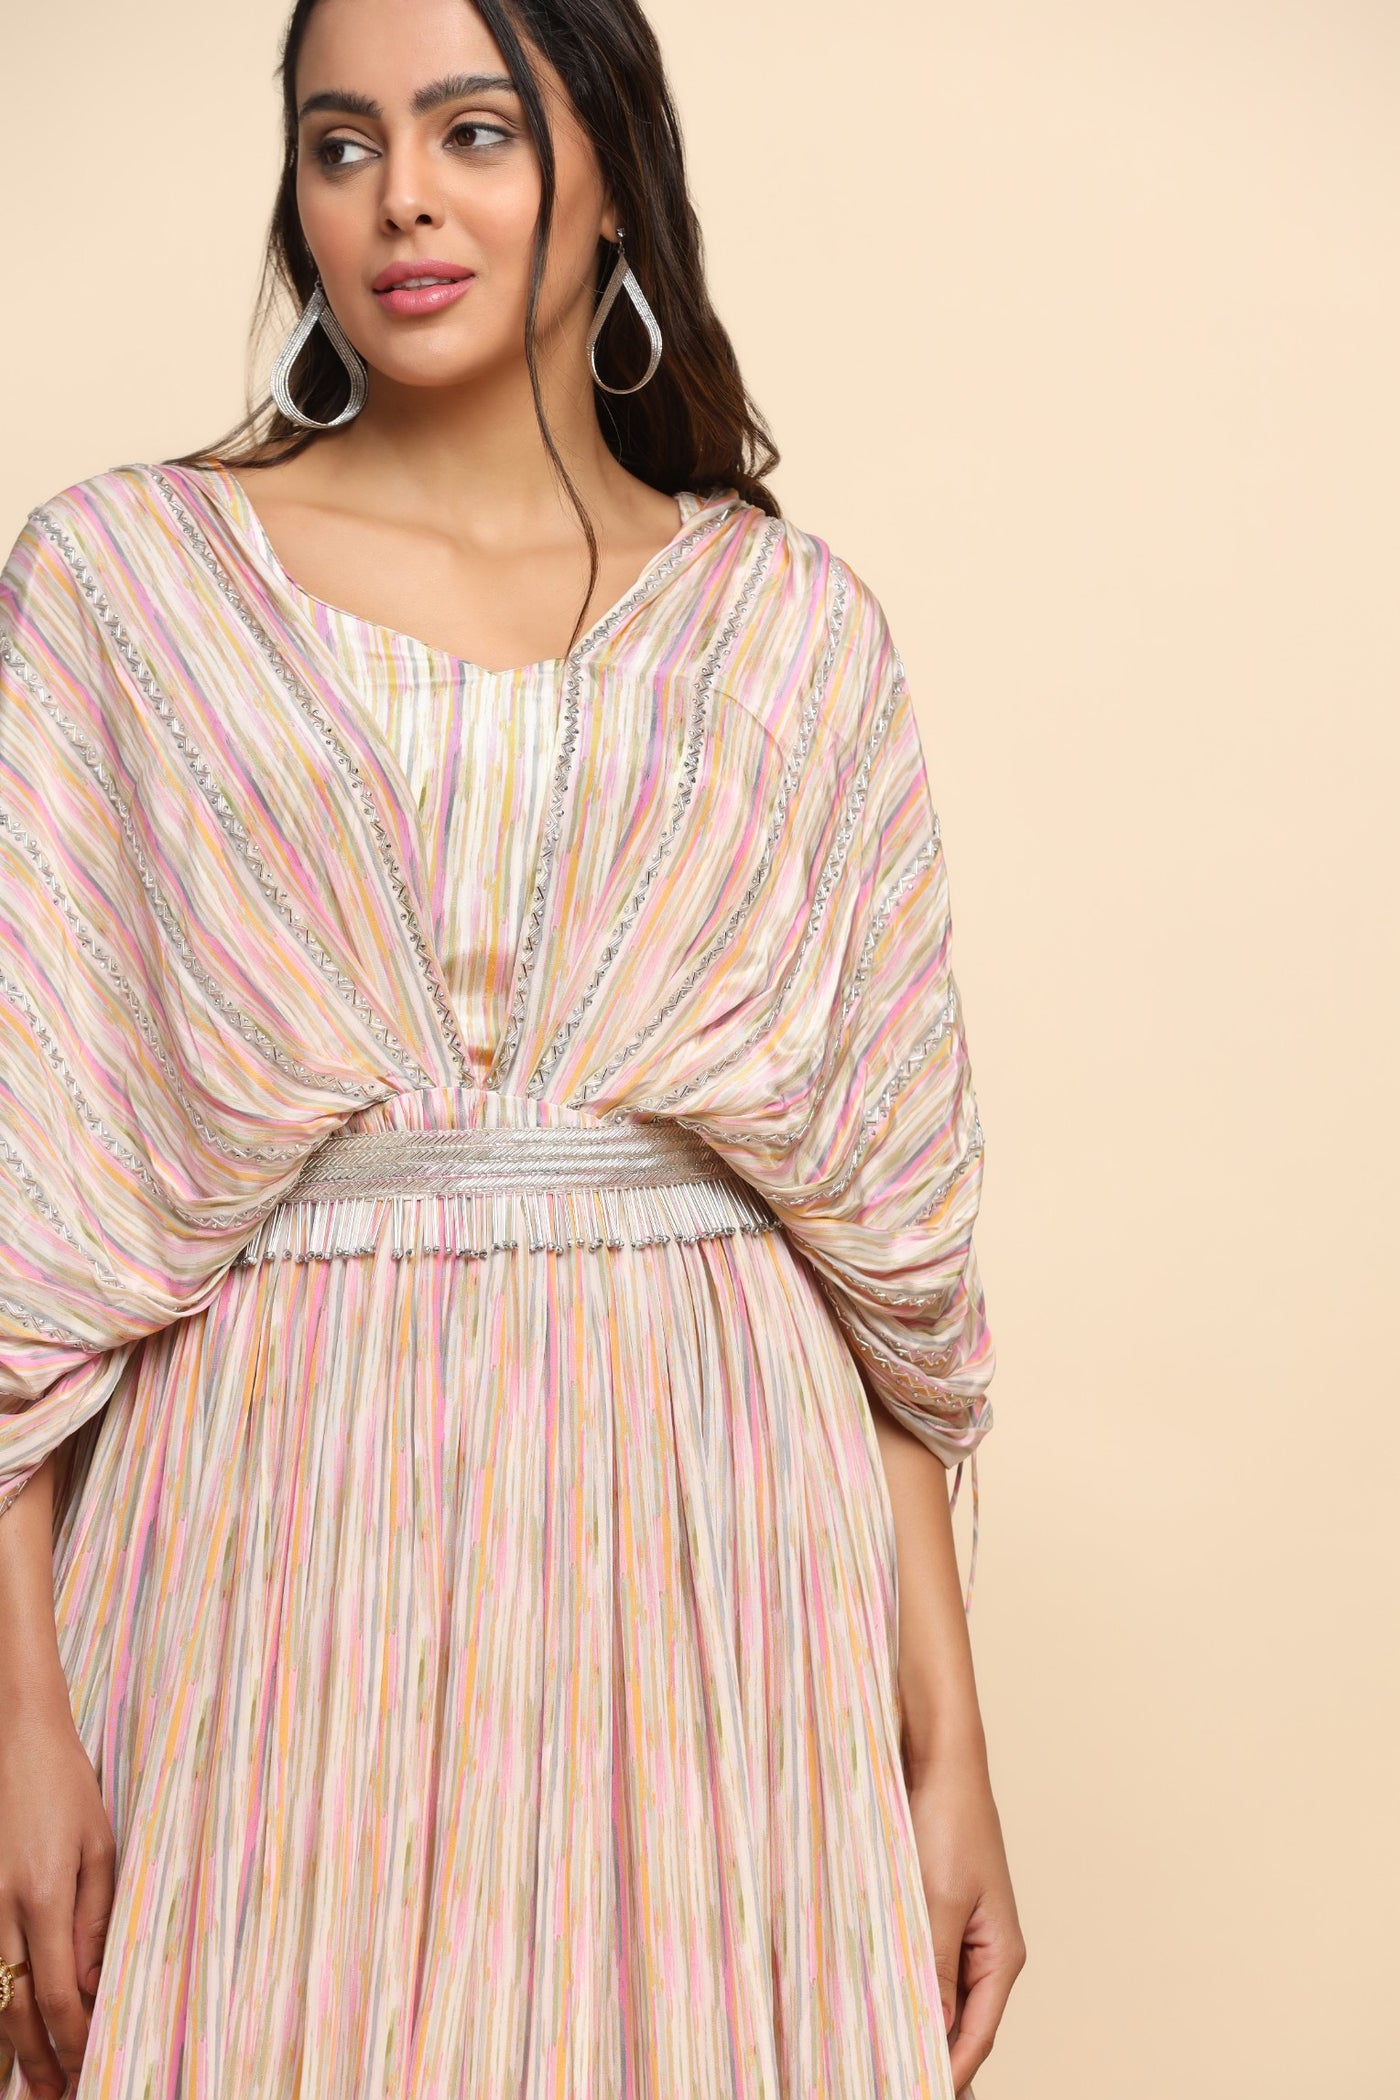 Elegant light multi color dress with curtain sleeves